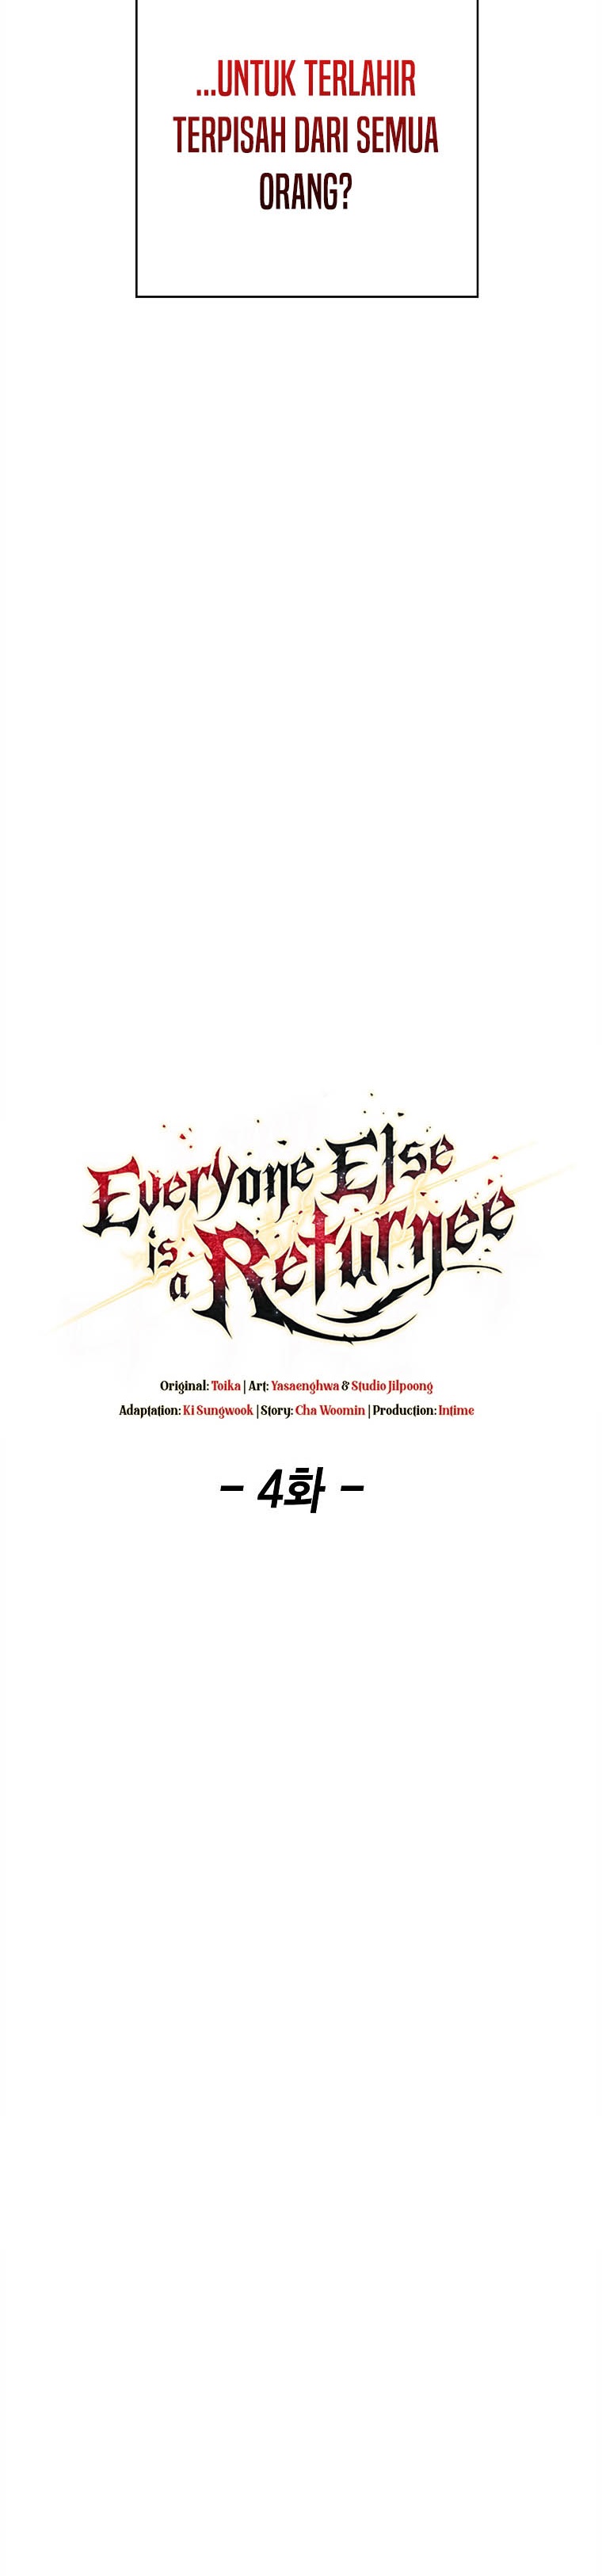 Everyone Else is A Returnee Chapter 04